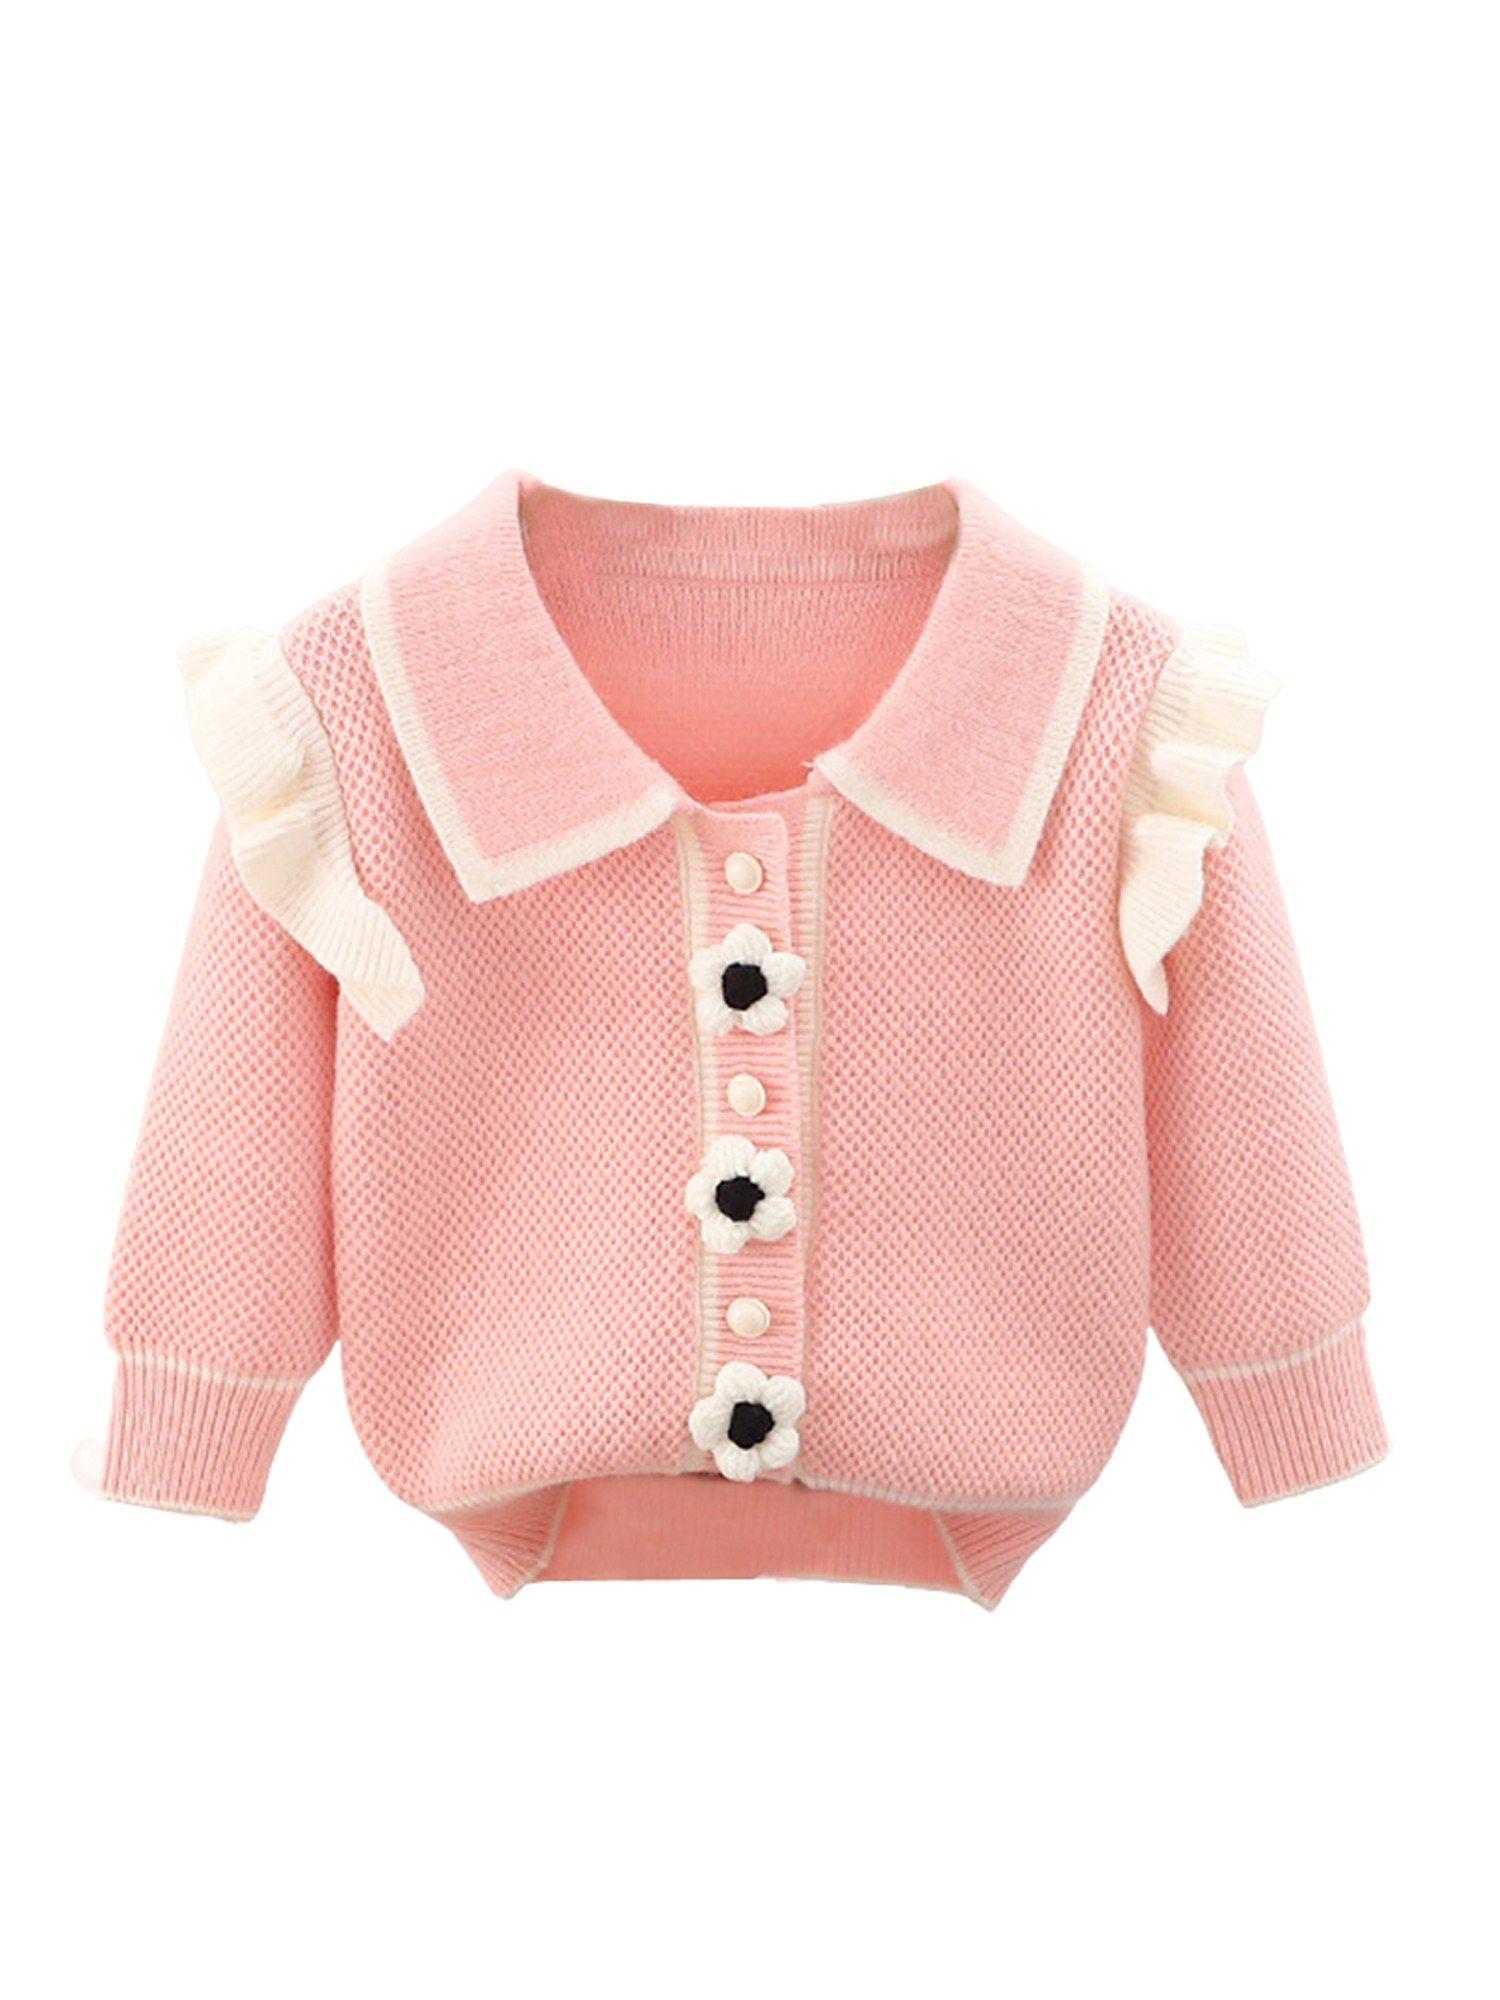 kids-baby-pink-knitted-cardigan-v-neck-sweater-with-flower-buttons